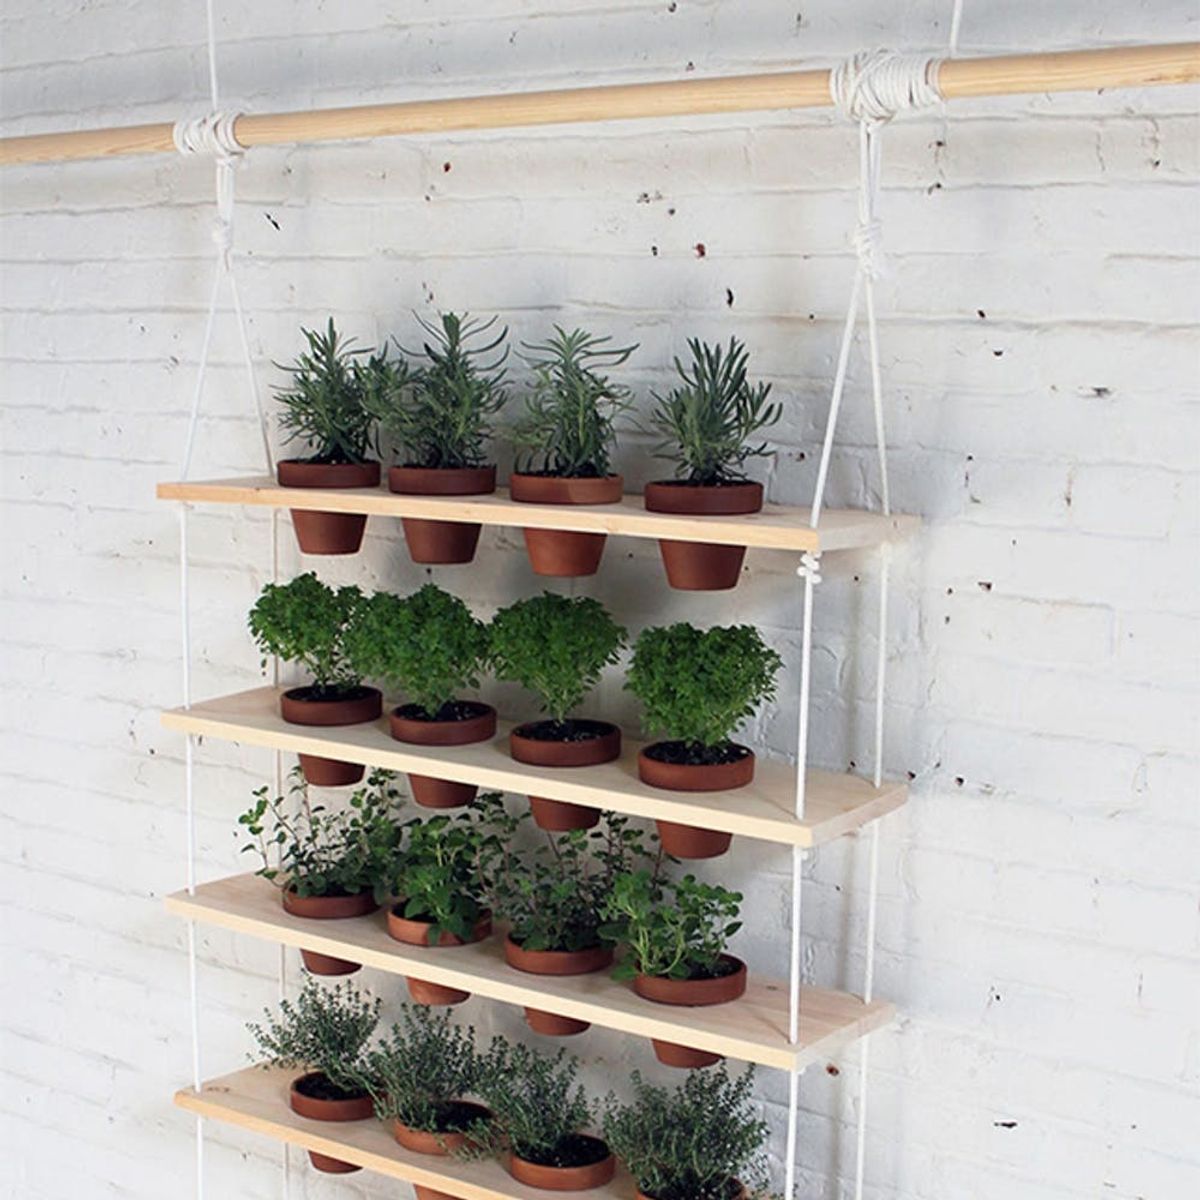 What to Make This Weekend: A Hanging Garden, Yarn Wall Art + More